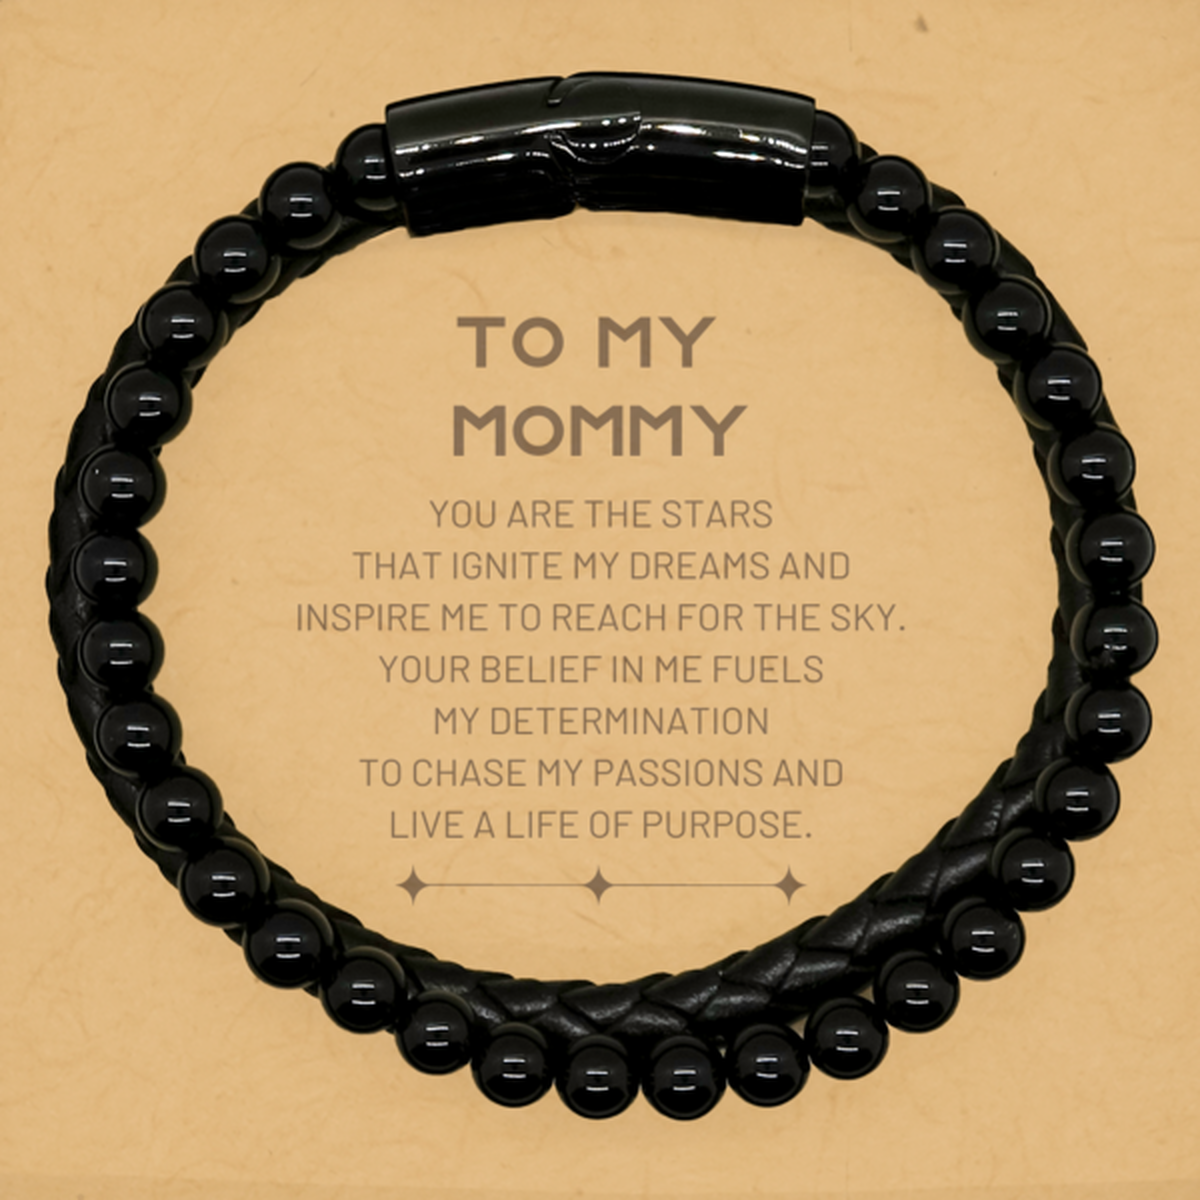 To My Mommy Stone Leather Bracelets, You are the stars that ignite my dreams and inspire me to reach for the sky, Birthday Unique Gifts For Mommy, Thank You Gifts For Mommy